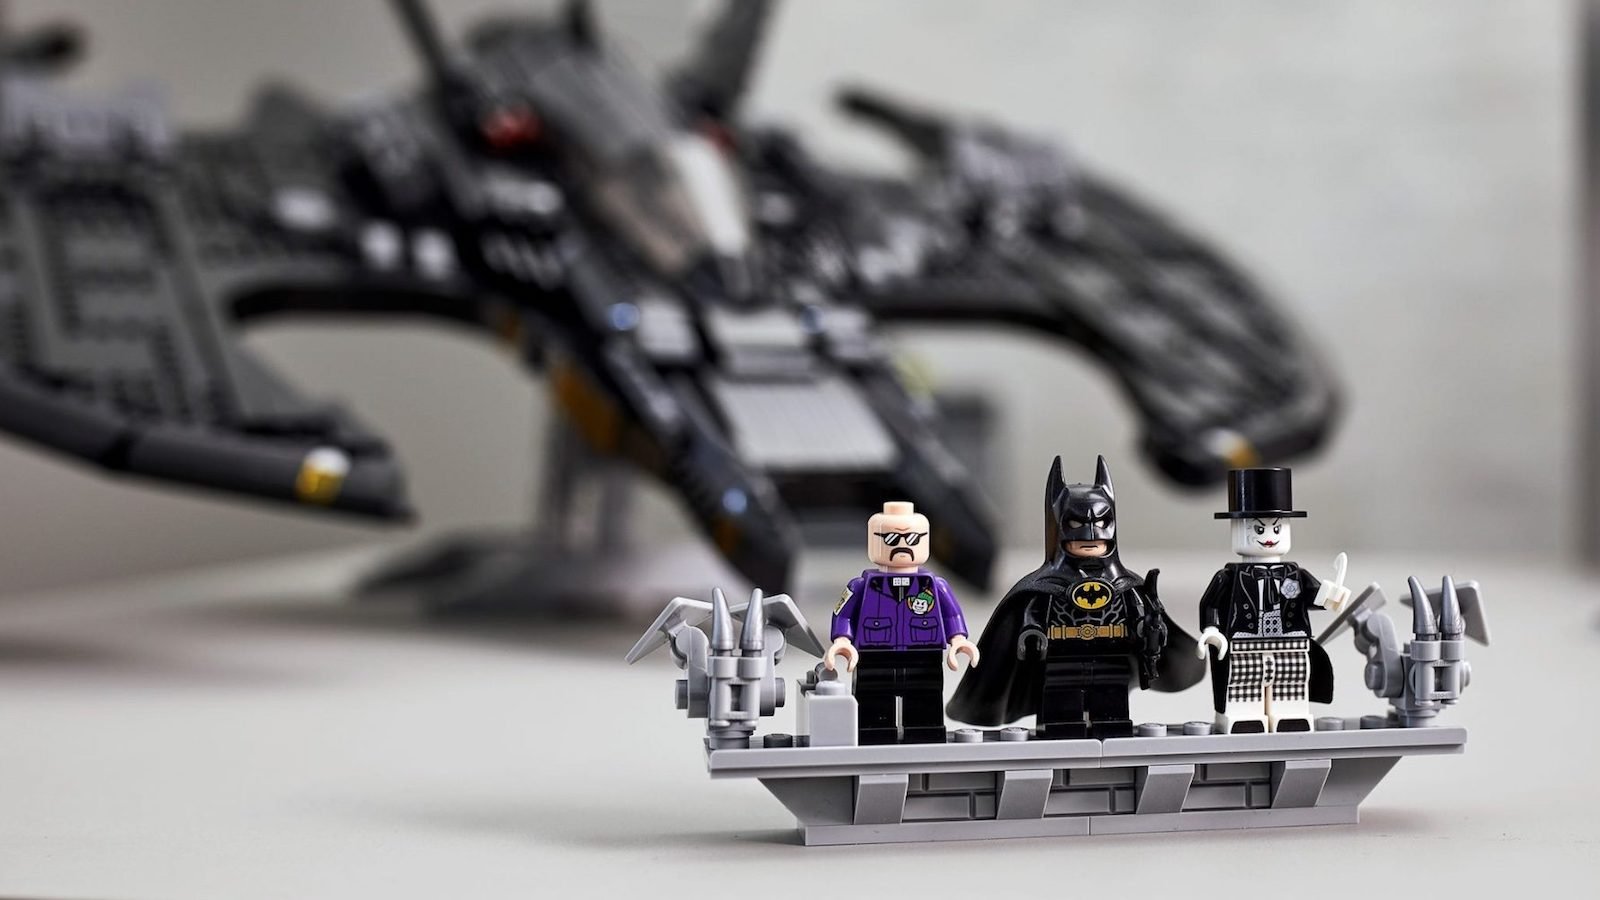 LEGO 1989 Batwing Batman building set brings the iconic 1989 movie to life